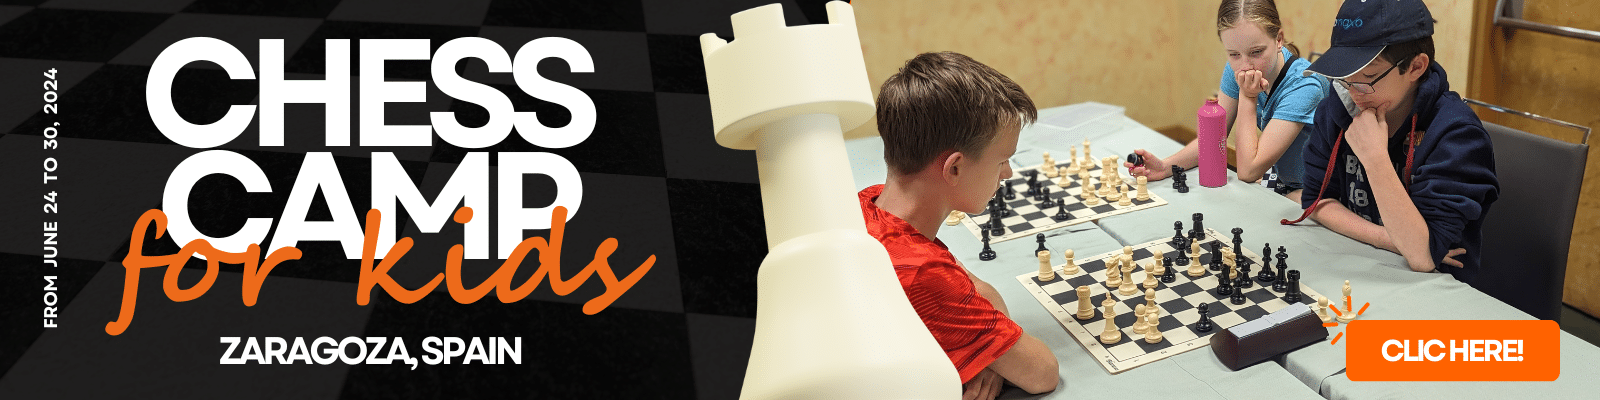 Banner chess camp